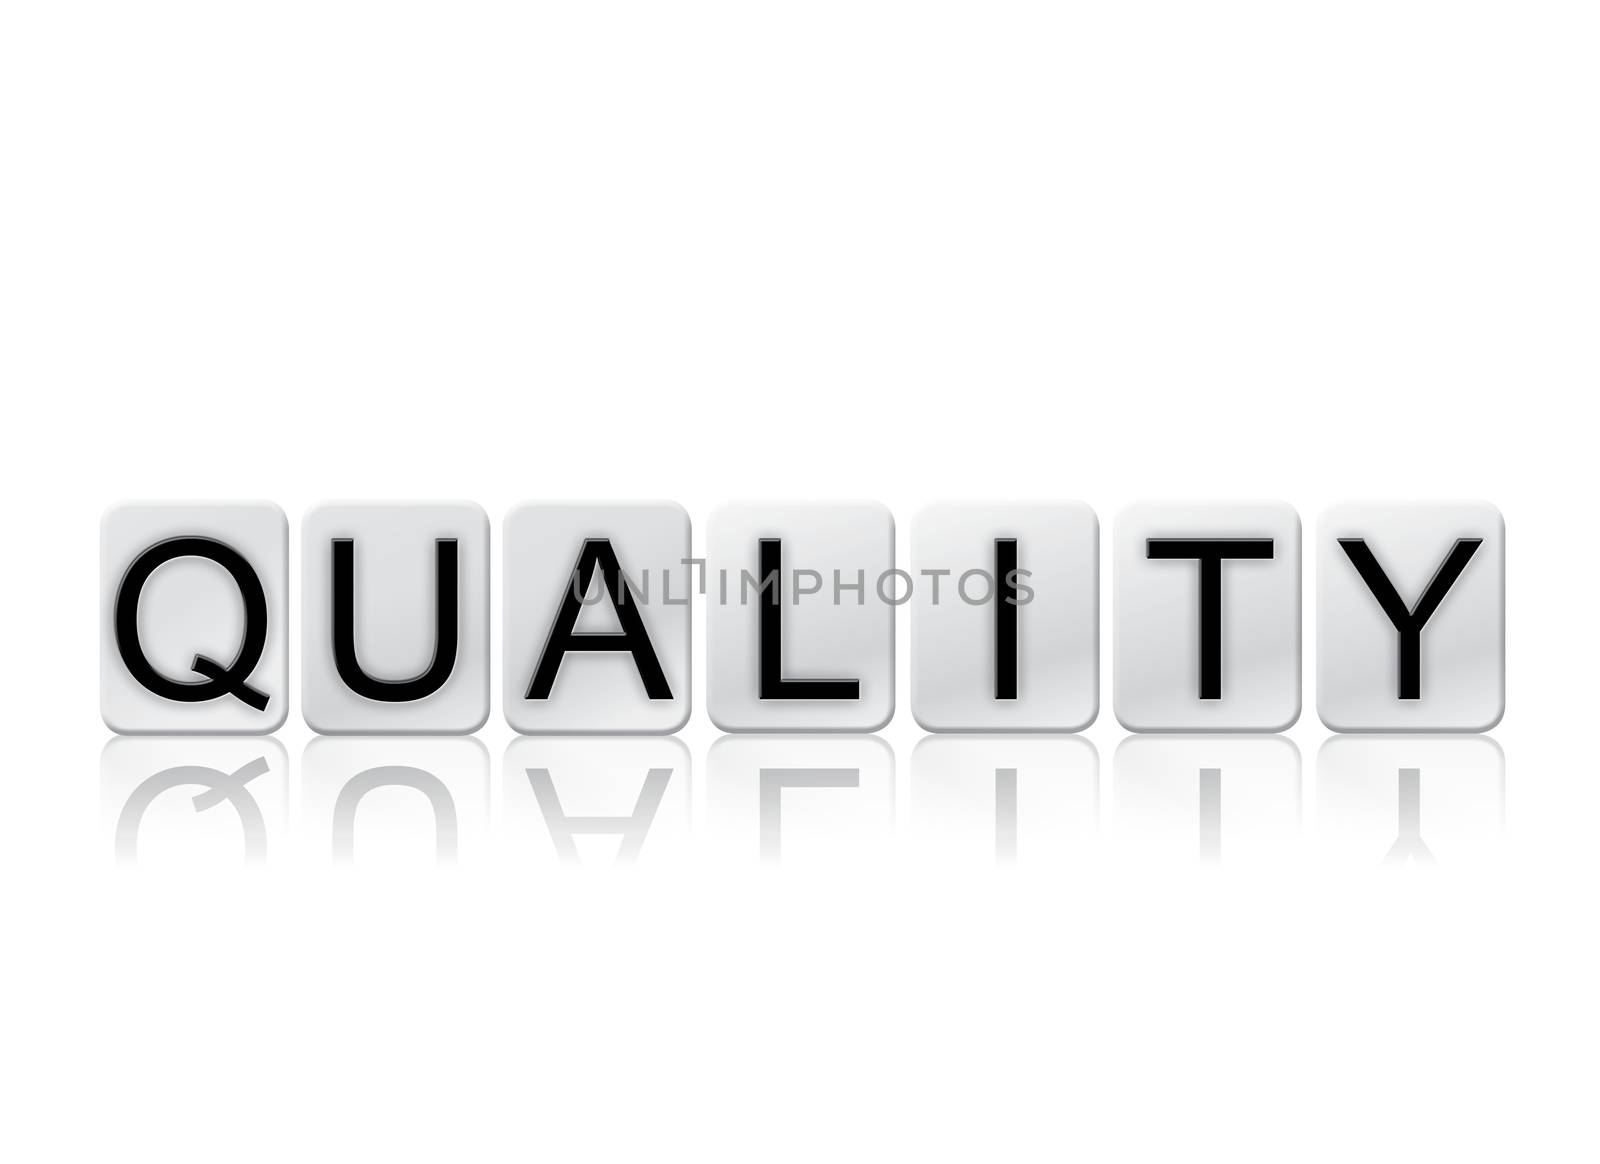 The word "Quality" written in tile letters isolated on a white background.